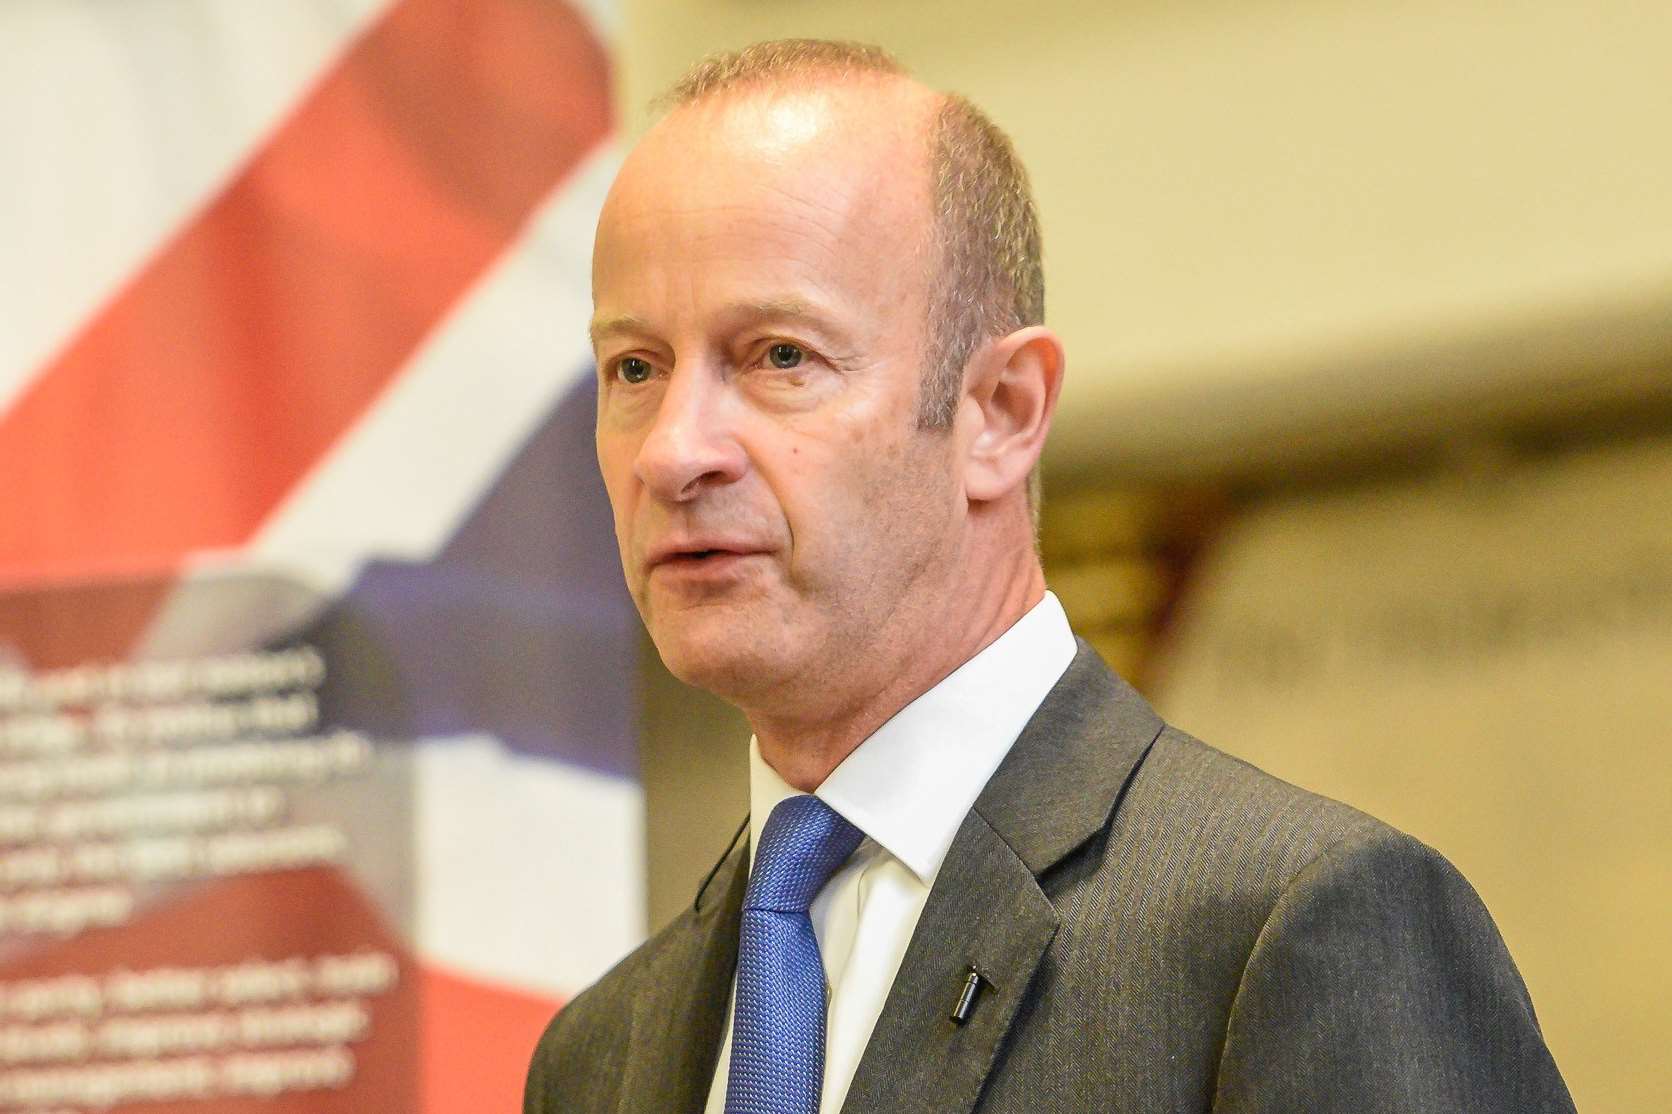 Henry Bolton quits Ukip after being ousted as leader